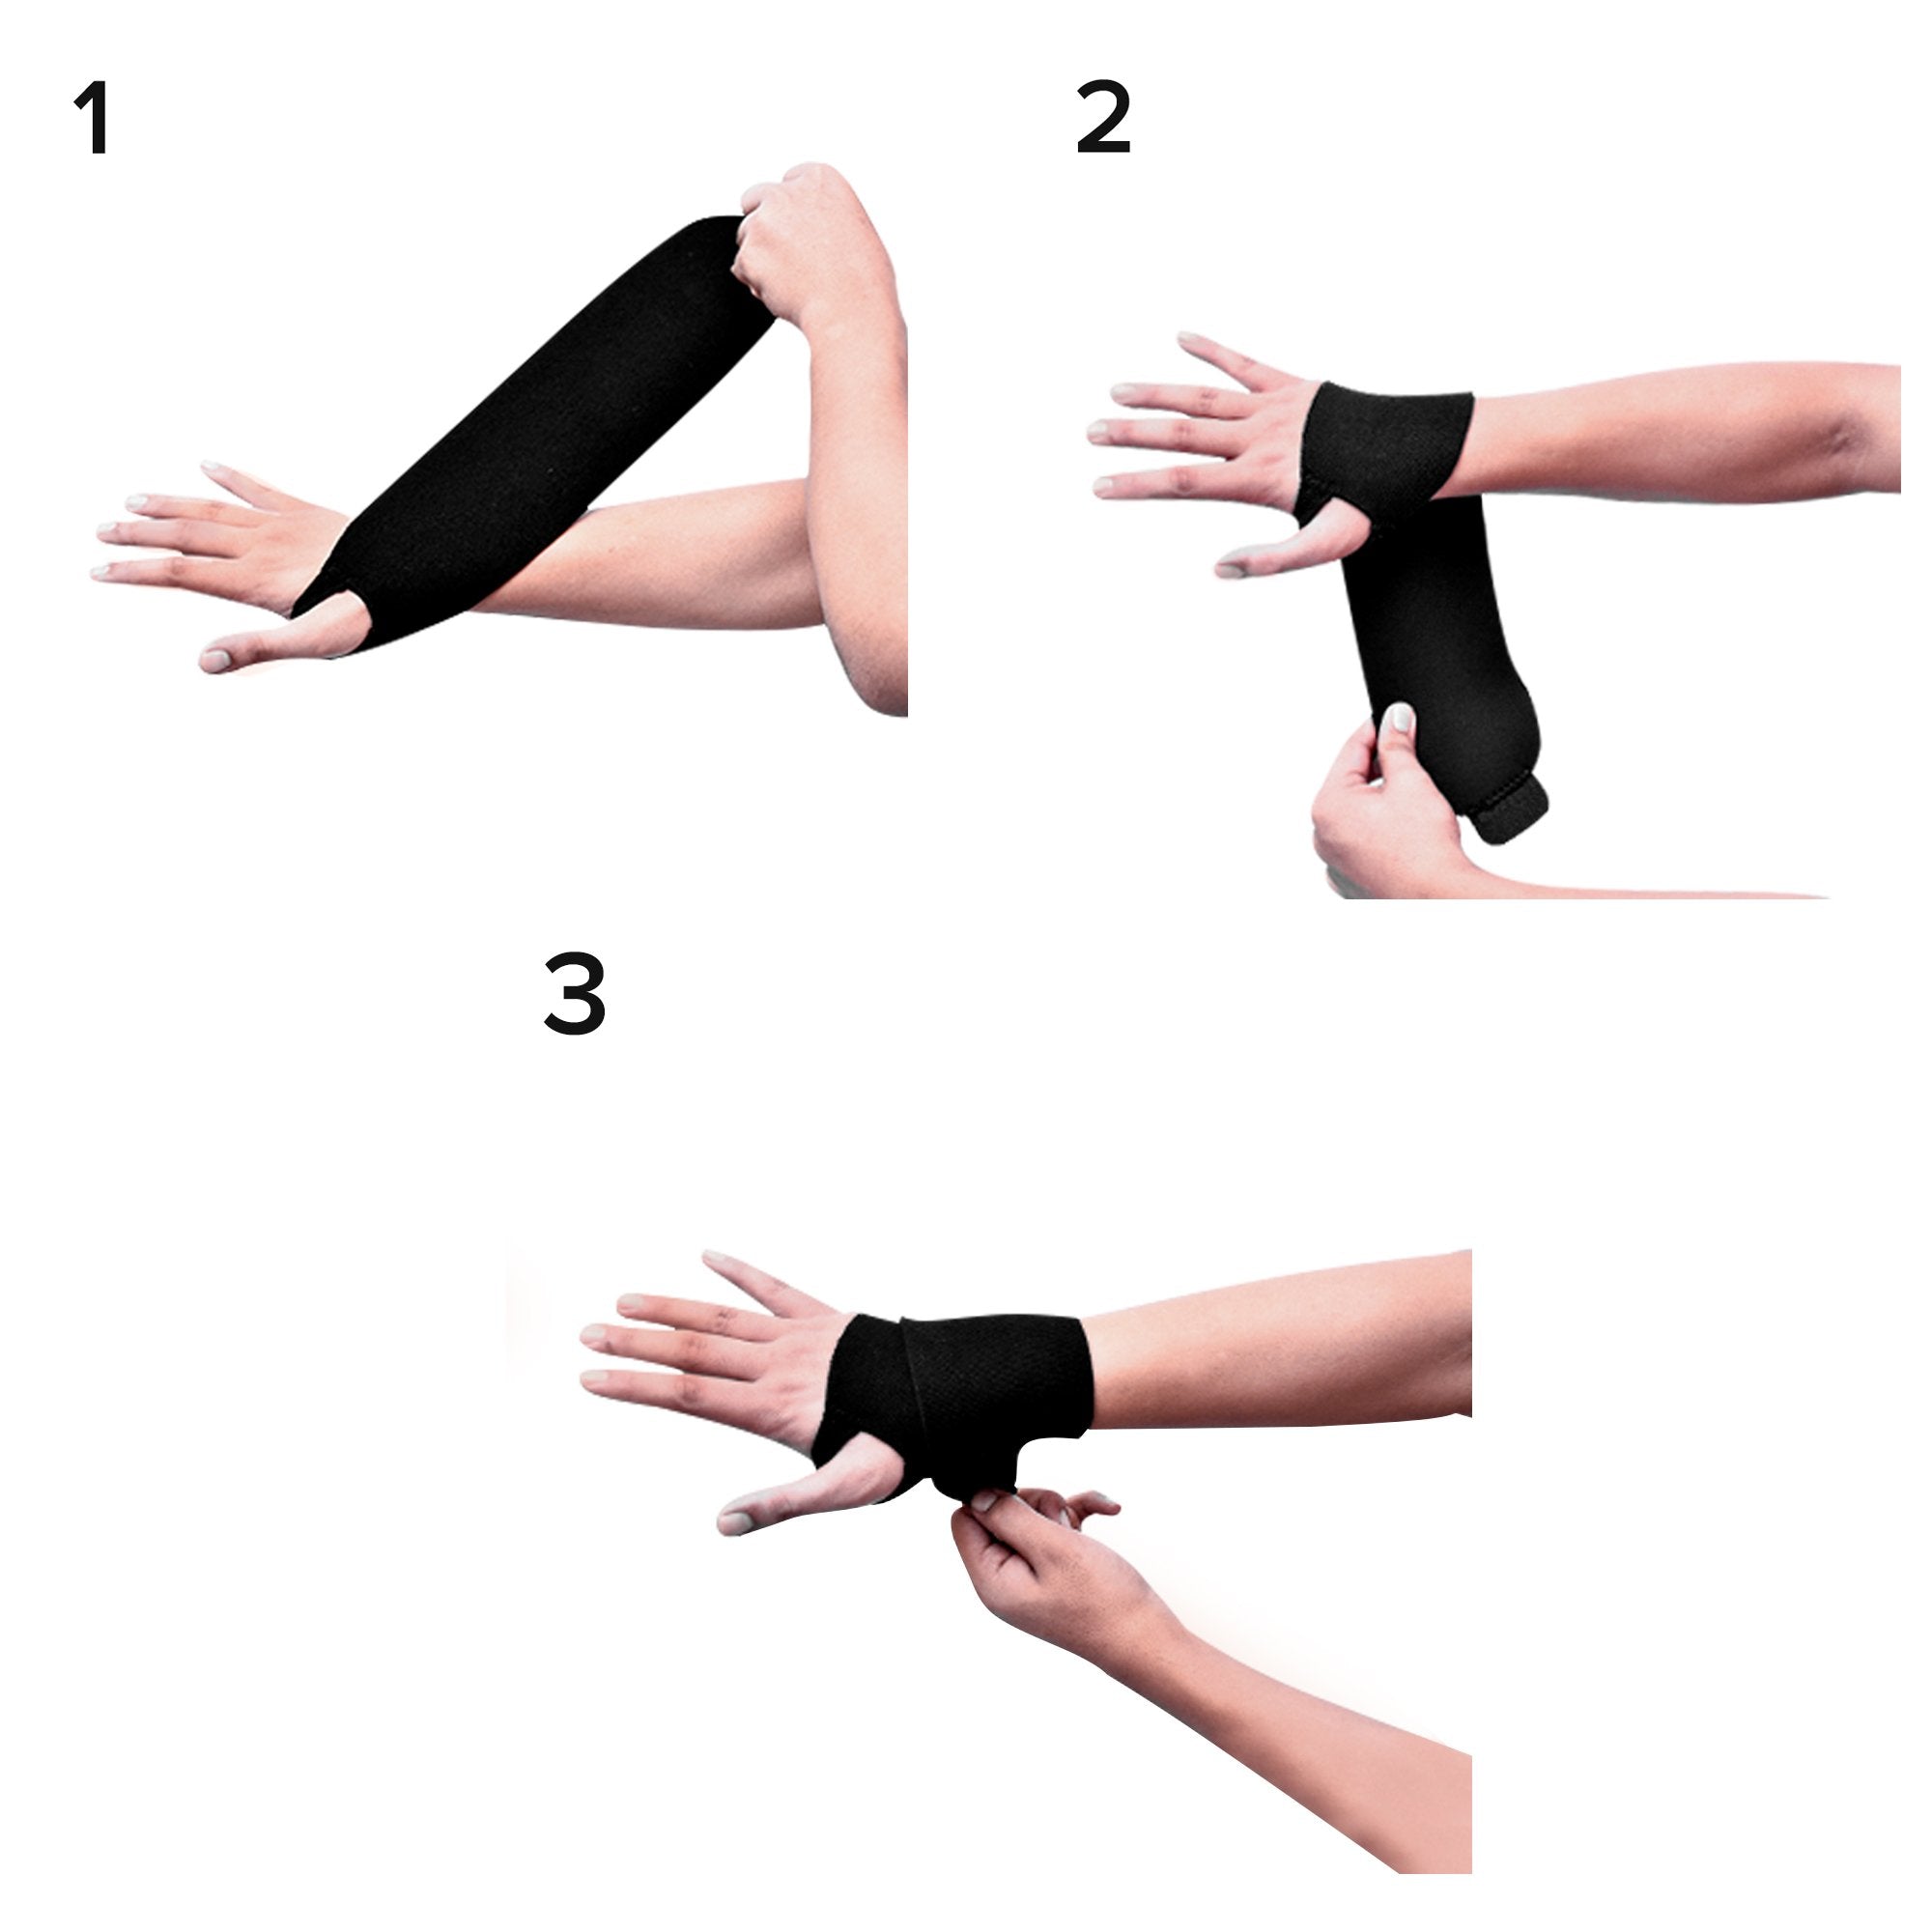 3M Futuro Adult Sport Wrist Support, Wraparound, Adjustable, Black, 4-1/2  to 9-1/2 One Size Fits Most, 12/Case